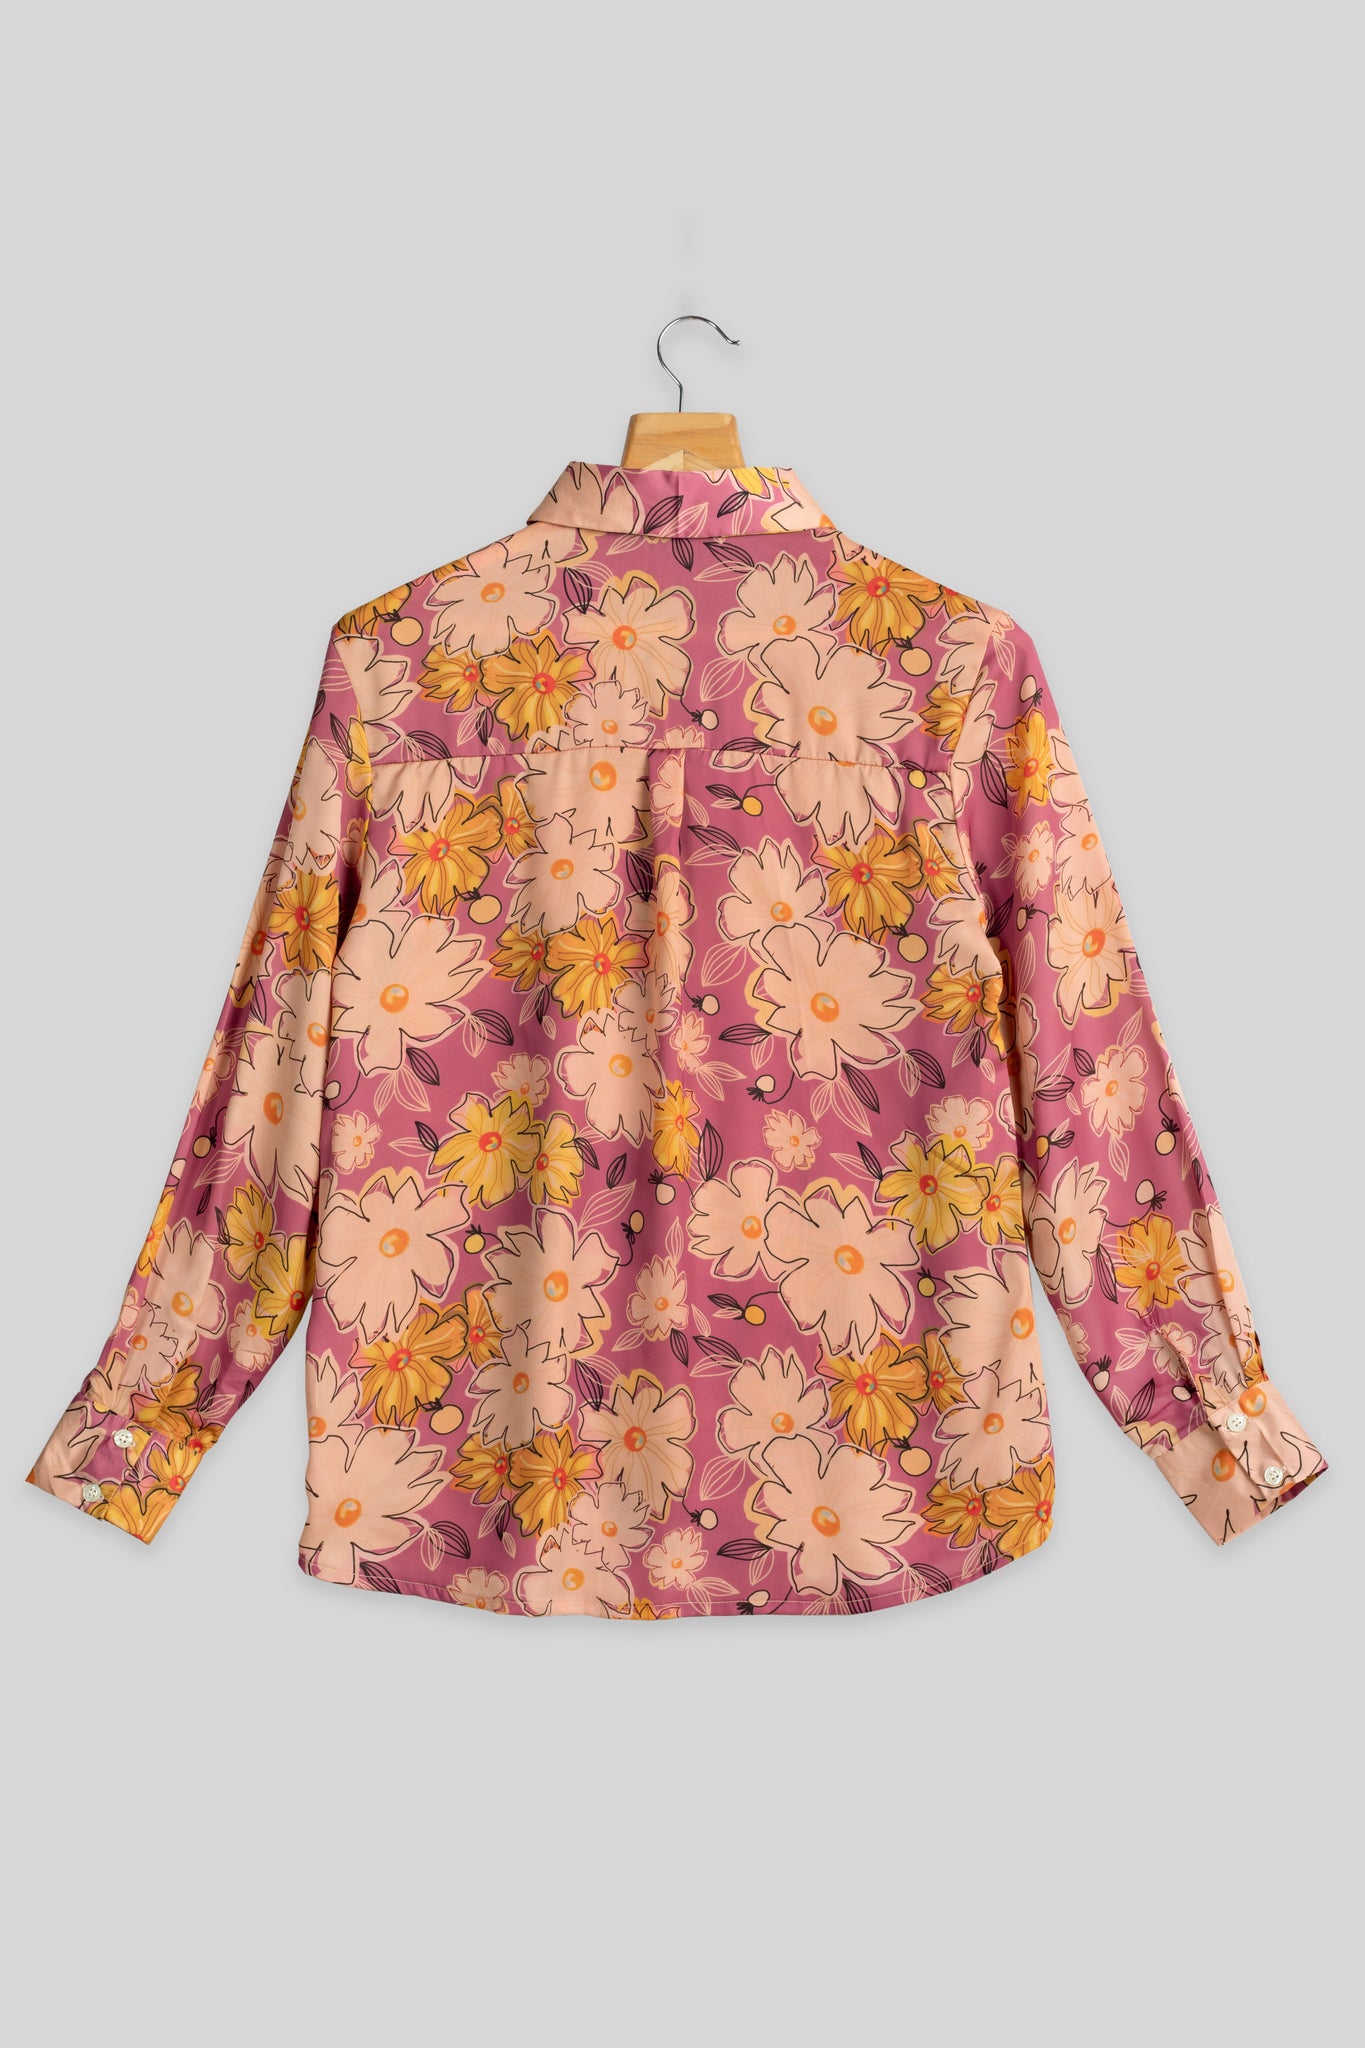 Stylish Floral Shirt For Women